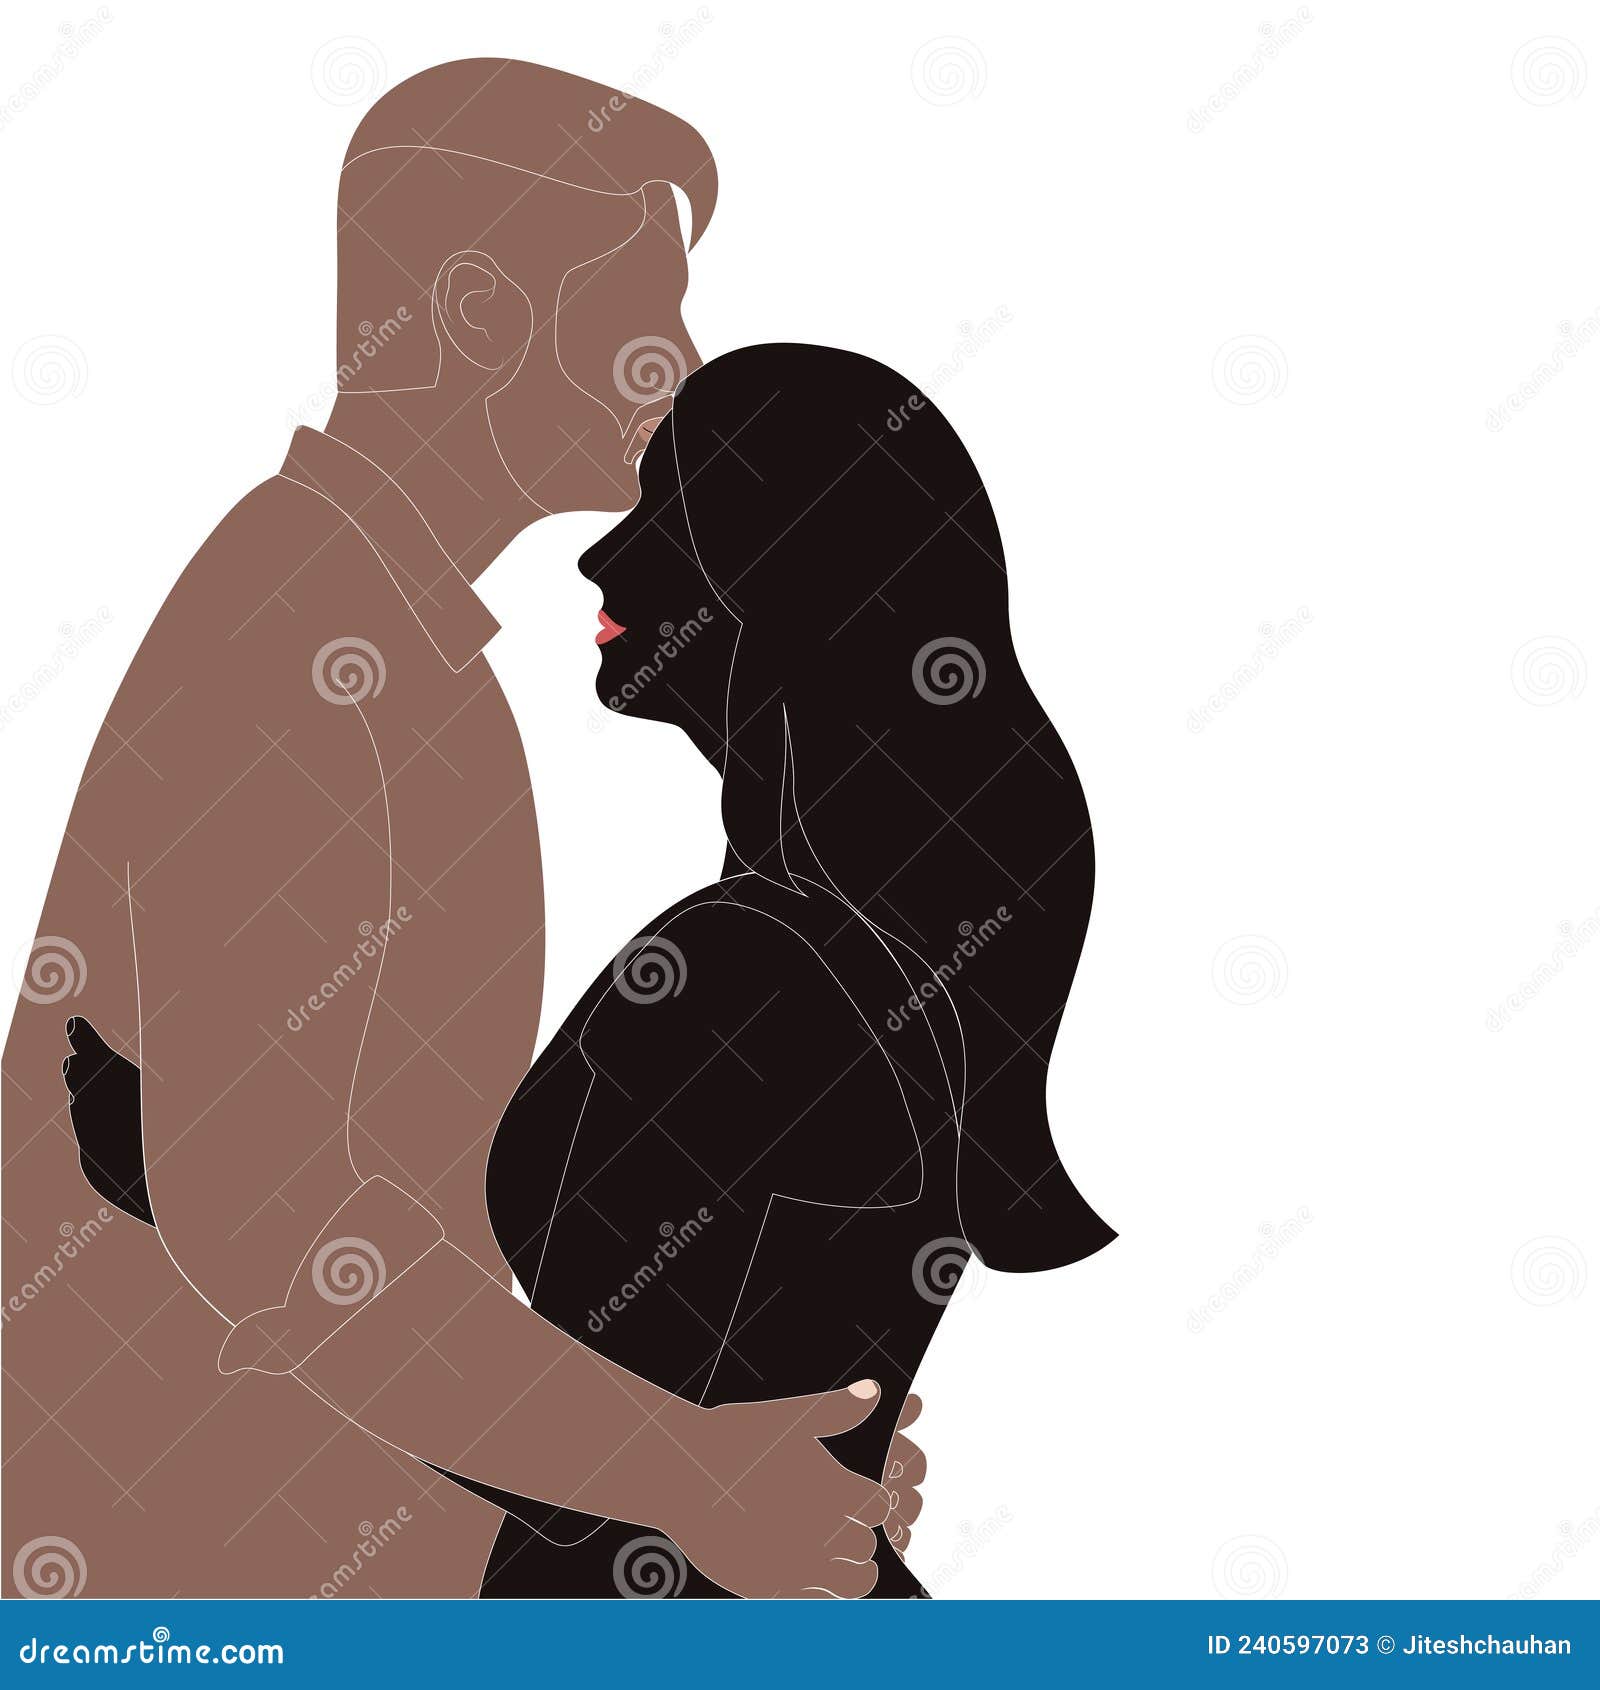 Drawing Of Pair Of Young Man And Woman Kissing And This Is Love Inscription  On White Background. Cute Romantic Couple On Date. Hand Drawn Realistic  Vector Illustration For Greeting Card, Postcard. Royalty